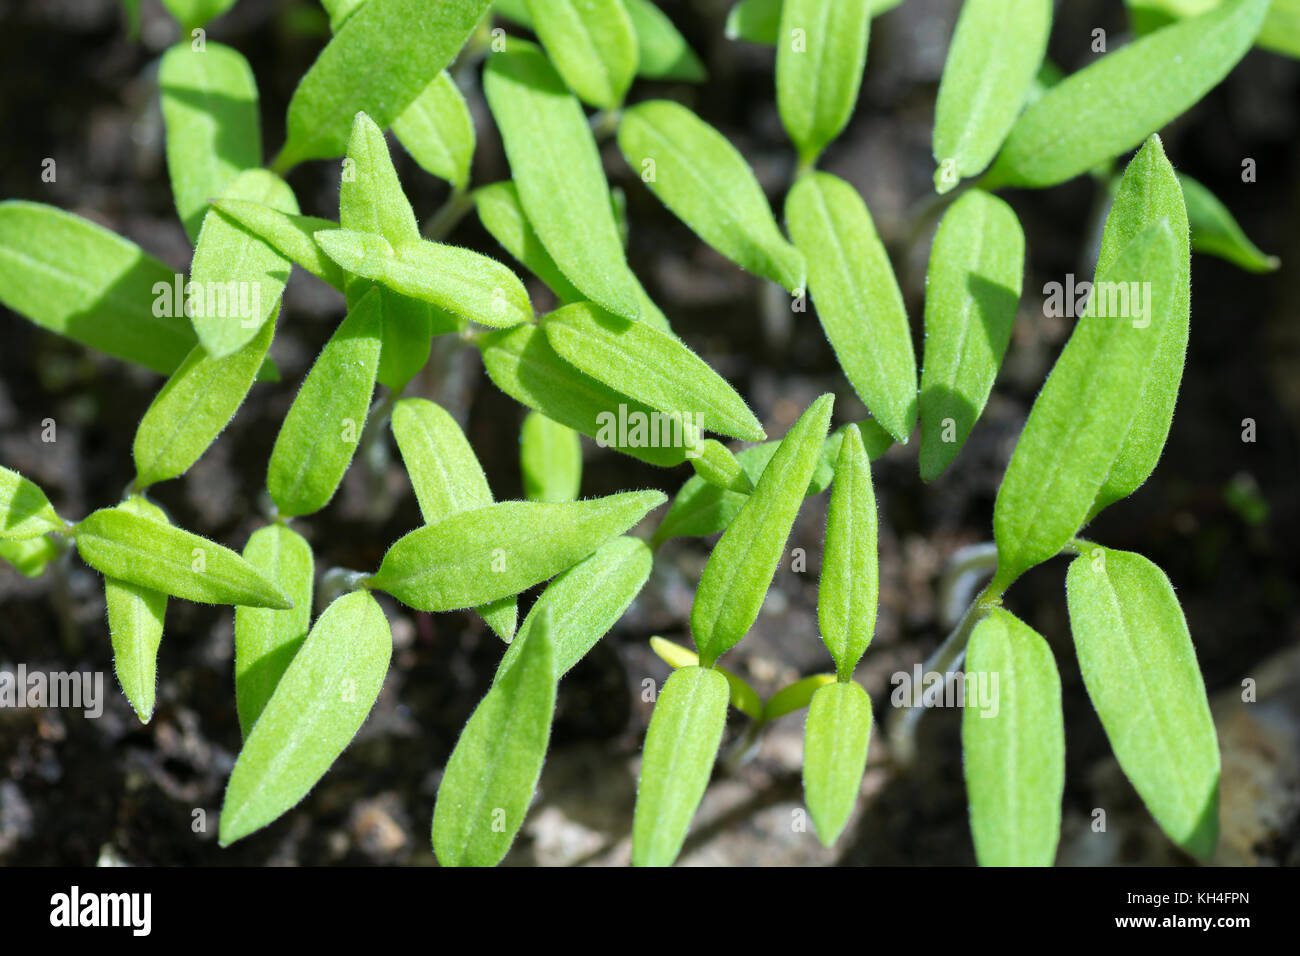 Green sprout growing out from soil on dark background. Stock Photo